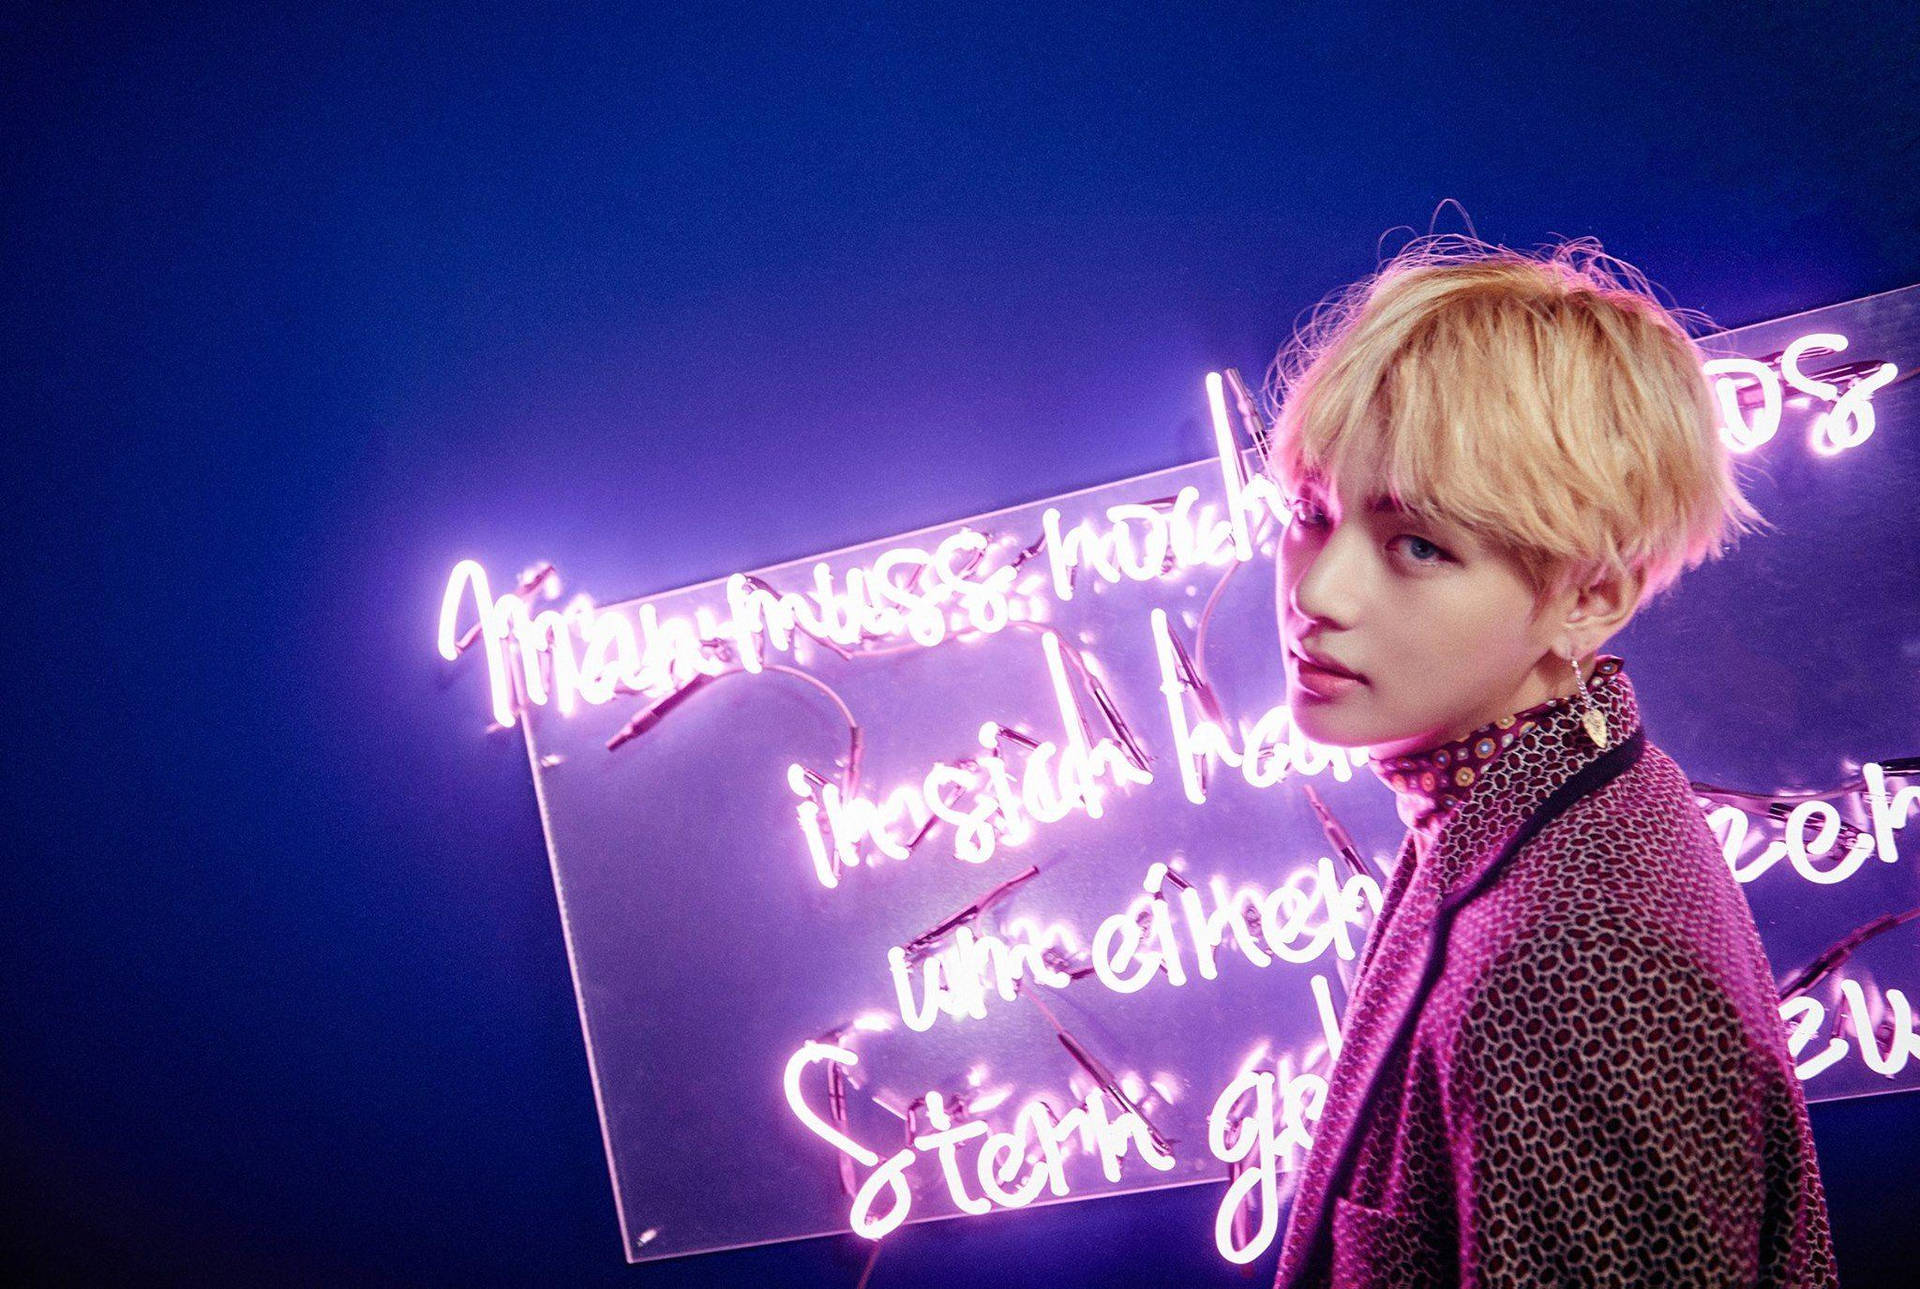 Taehyung Cute With Neon Lights Wallpaper